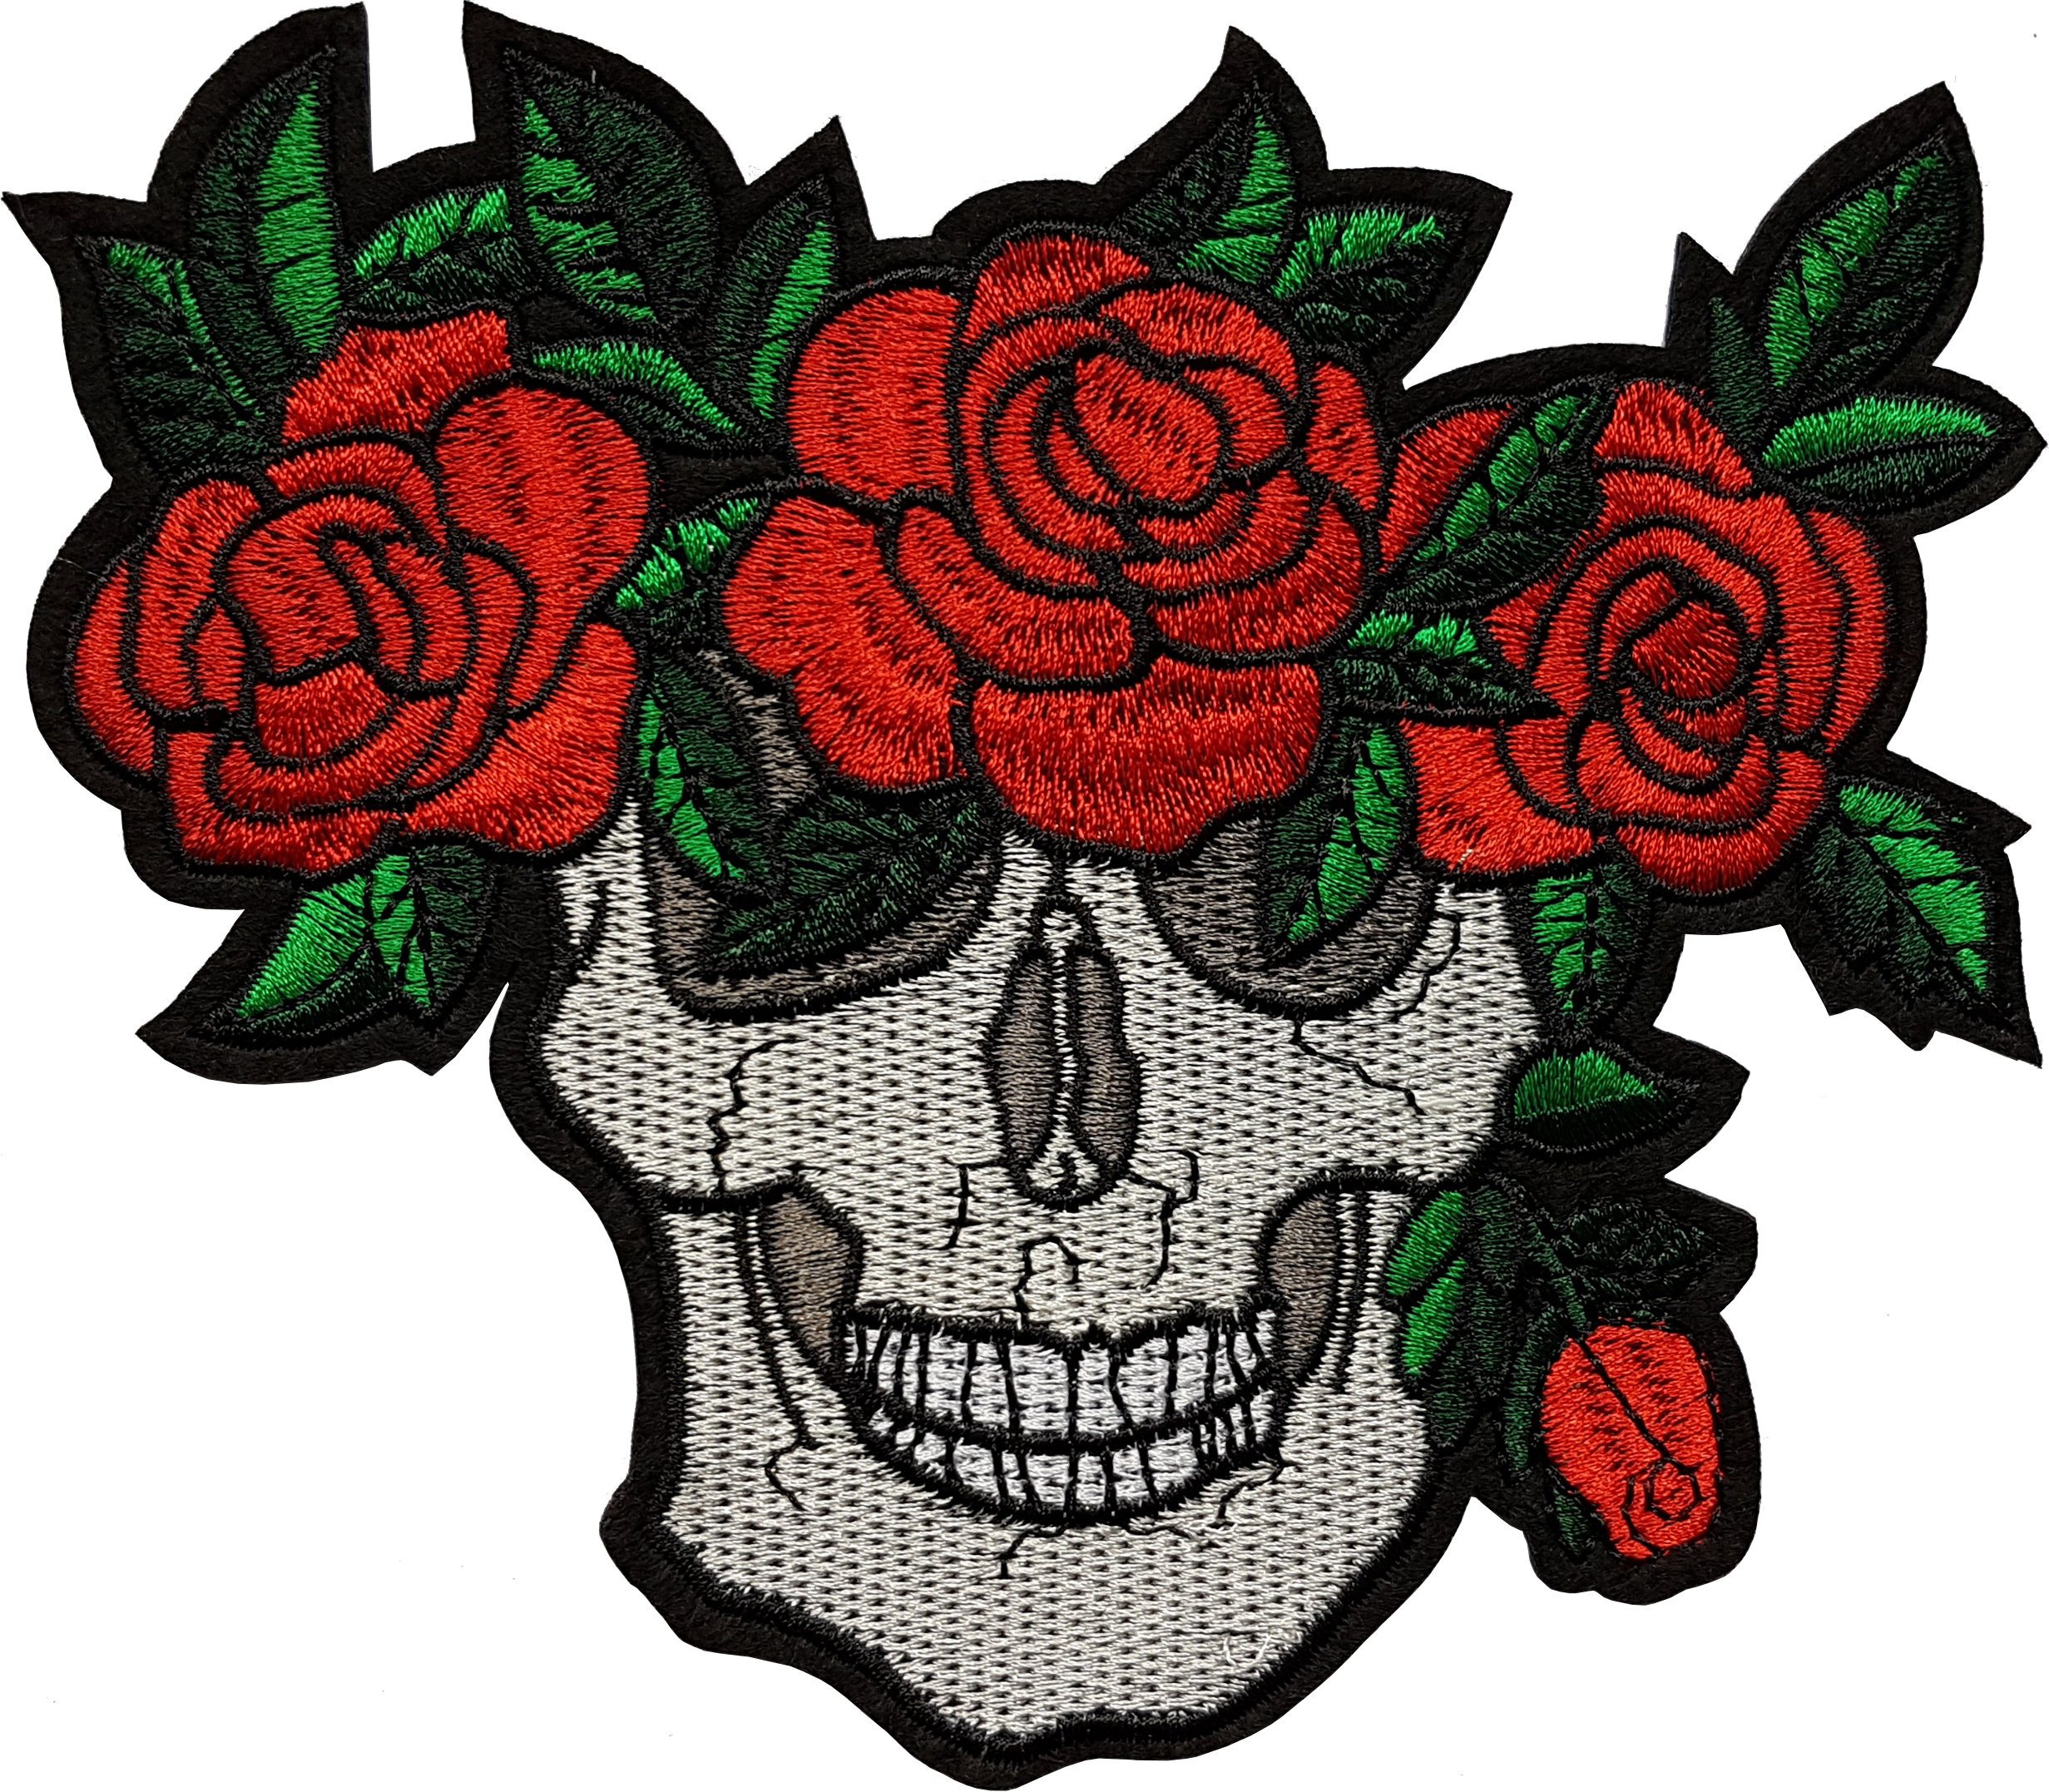 Grand Patch Thermocollant Skull Couronne Fleurs Roses Rouges